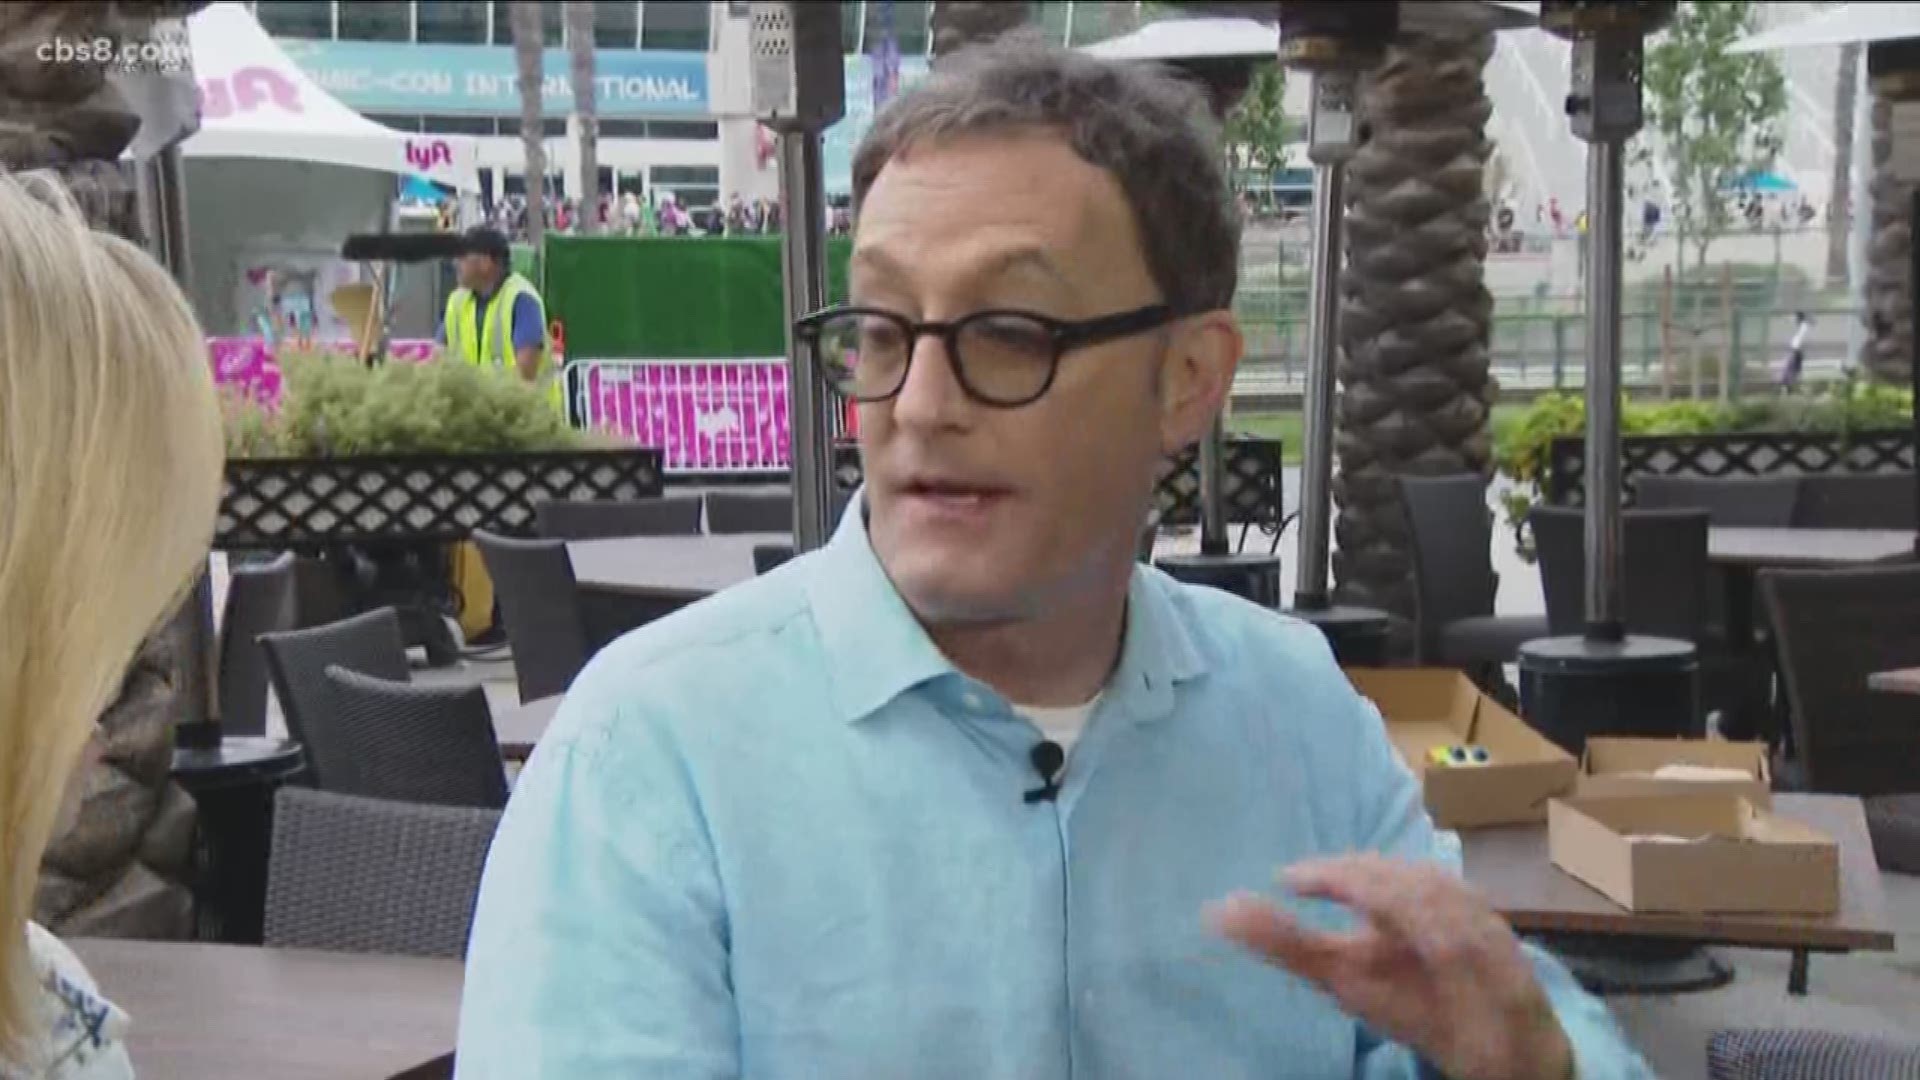 Voice actor for Spongebob himself, Tom Kenny stopped by to talk about celebrating the shows 20th anniversary and he even shows how to do Spongebob's iconic laugh.